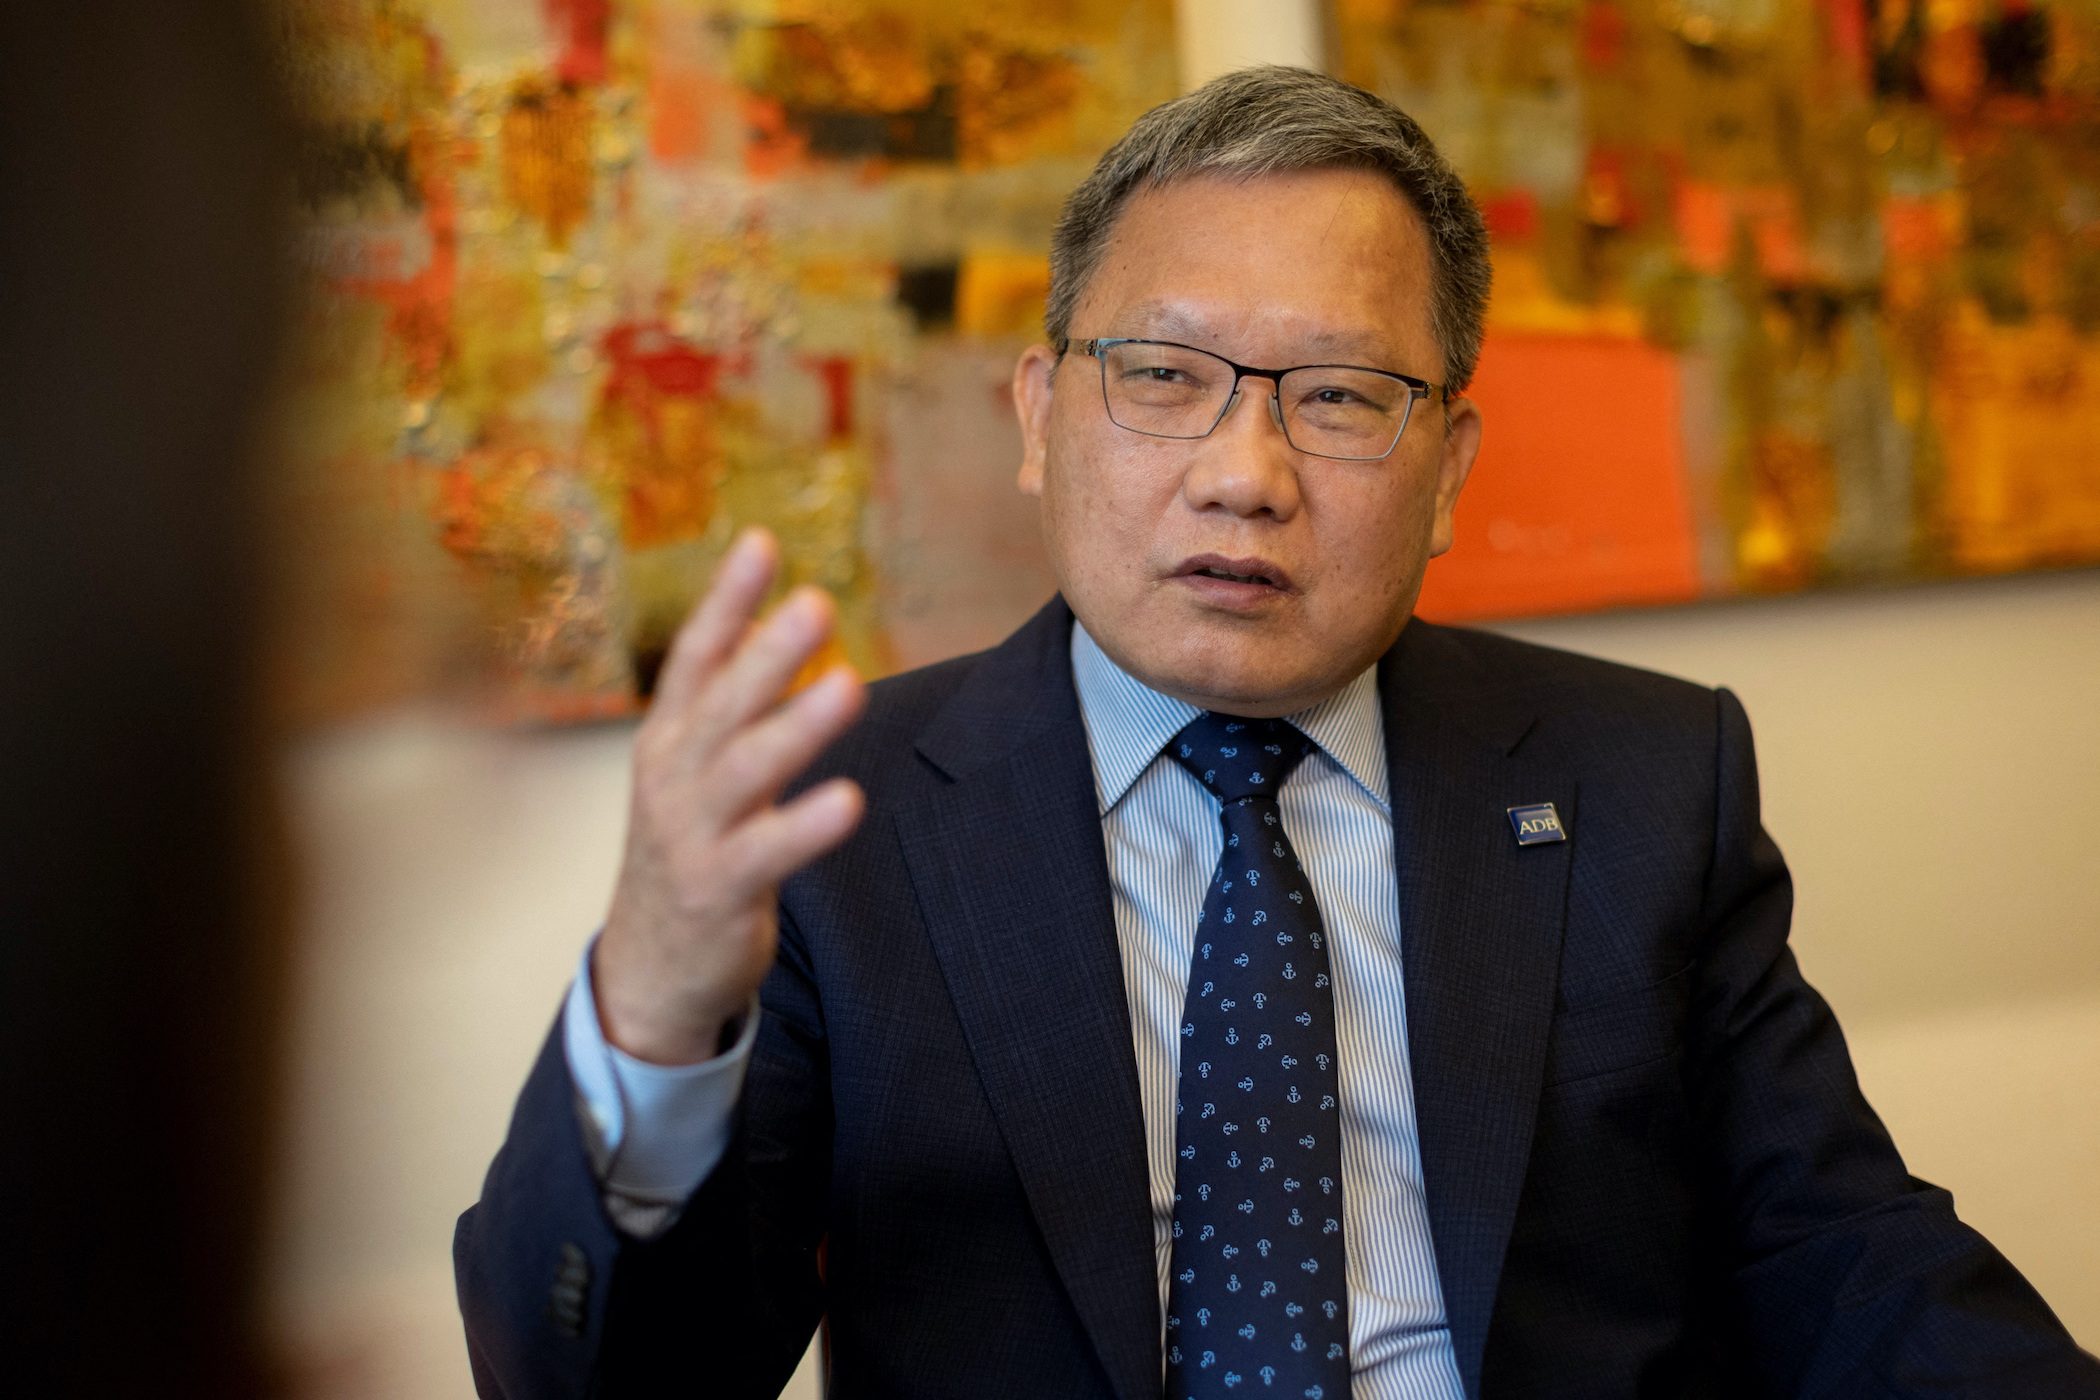 Capital outflows likely ‘temporary,’ Taiwan can keep markets stable – finance minister